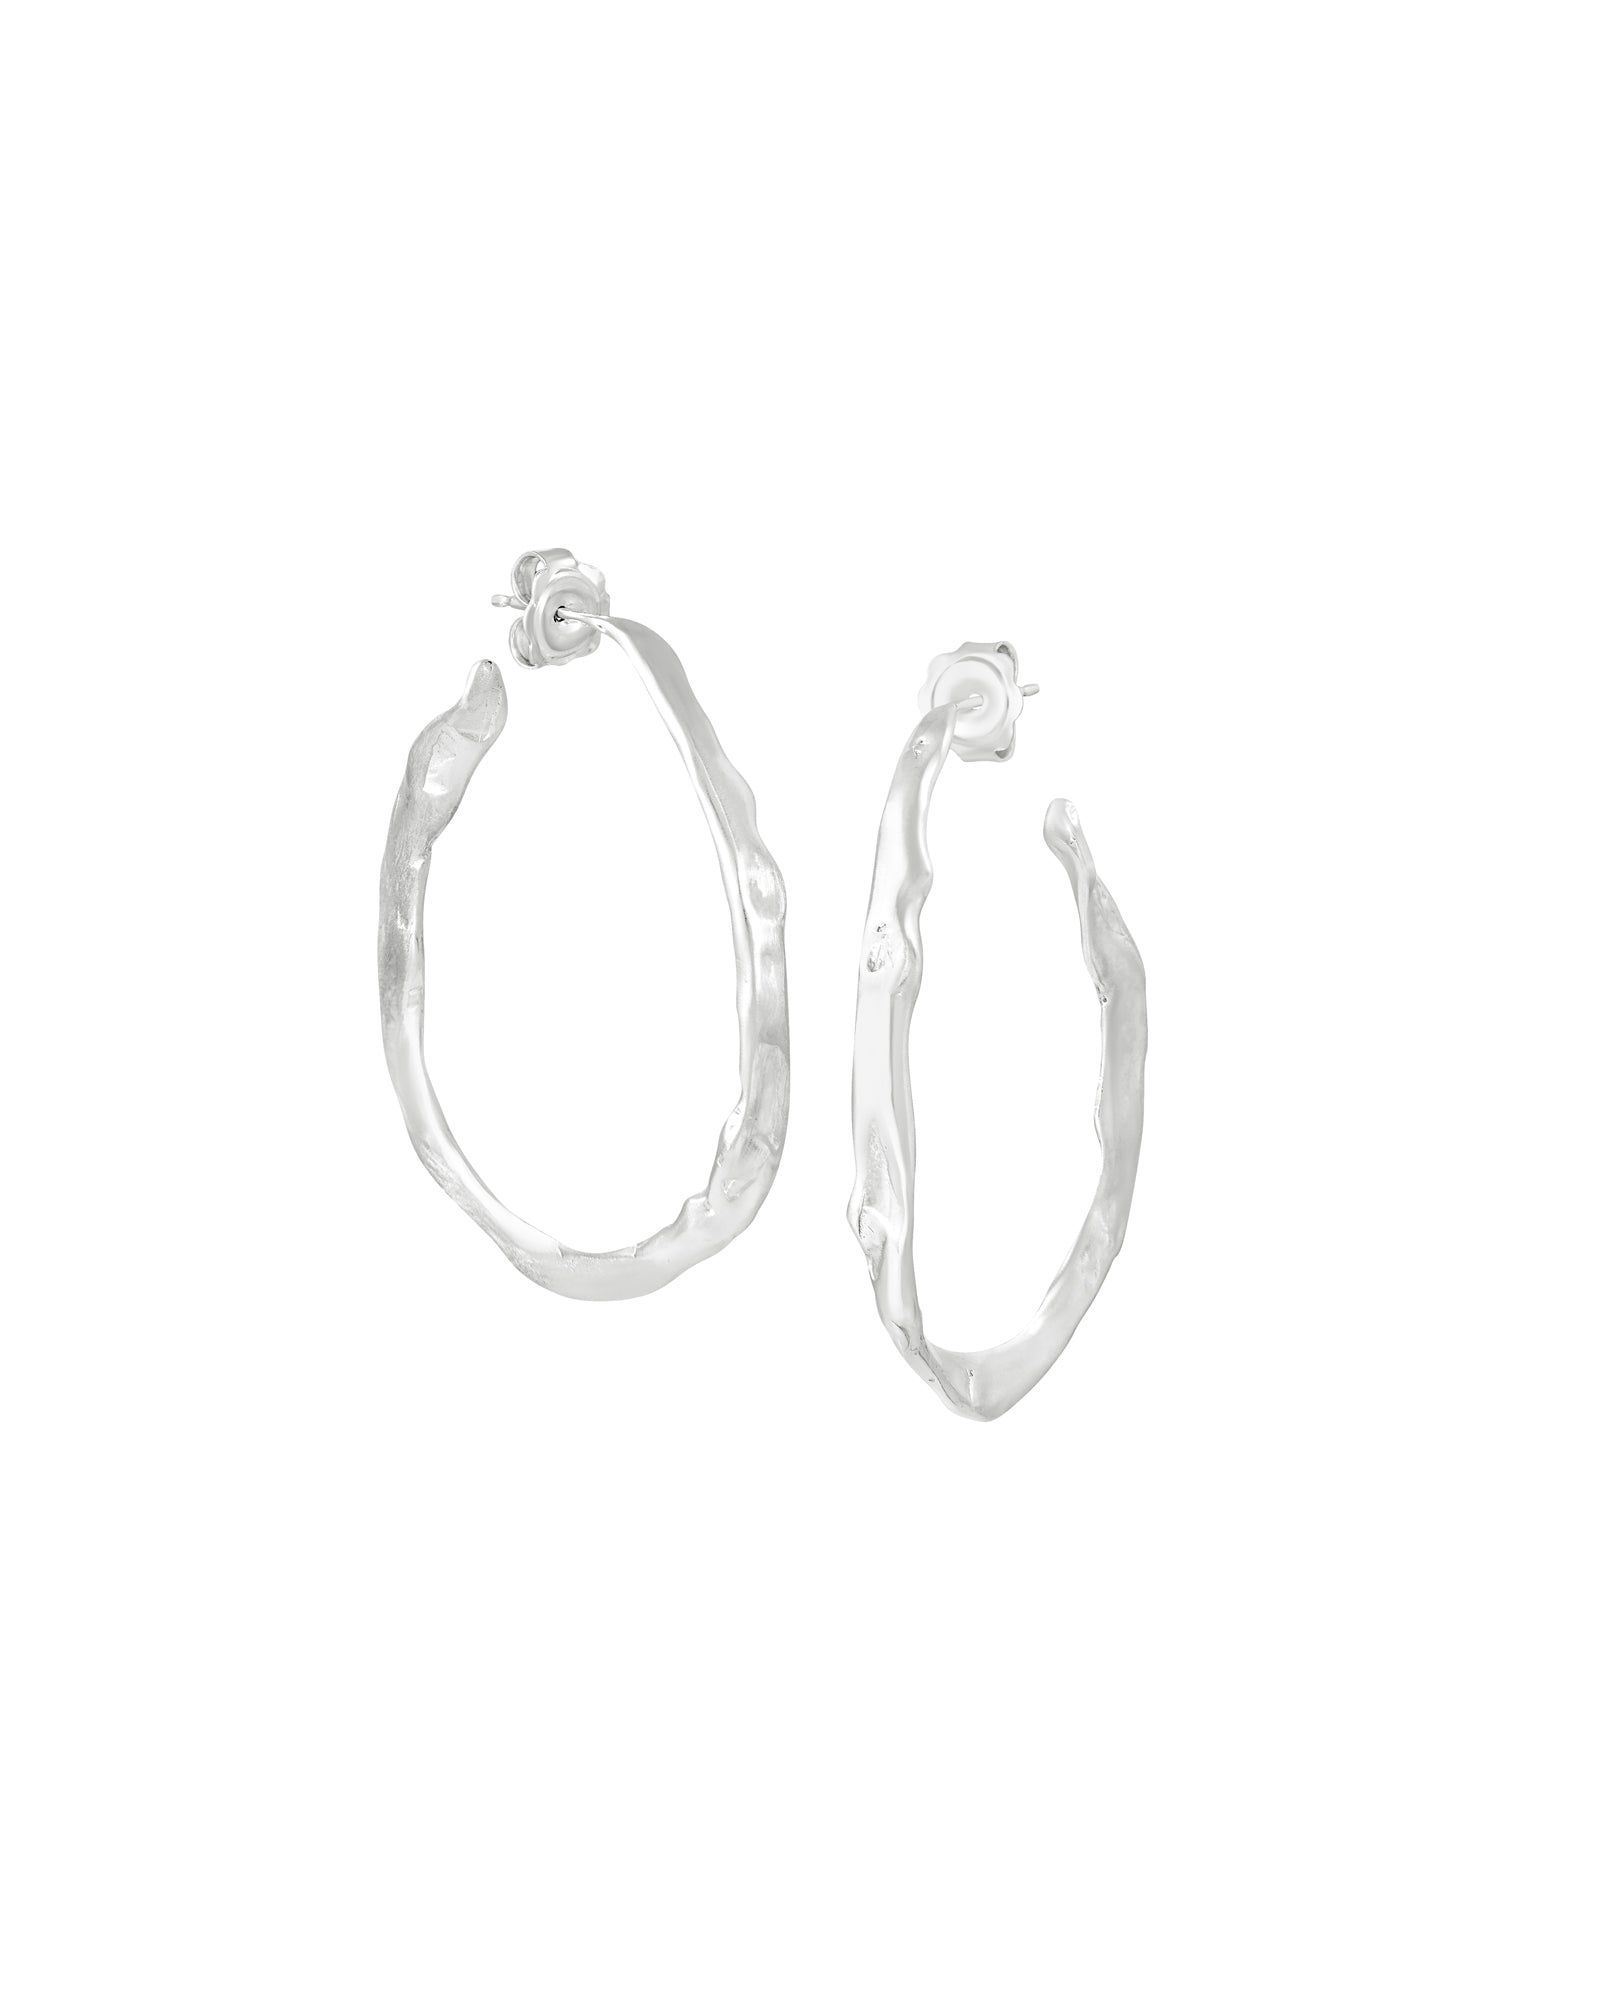 Soft Sculptural Hoops | Recycled Silver